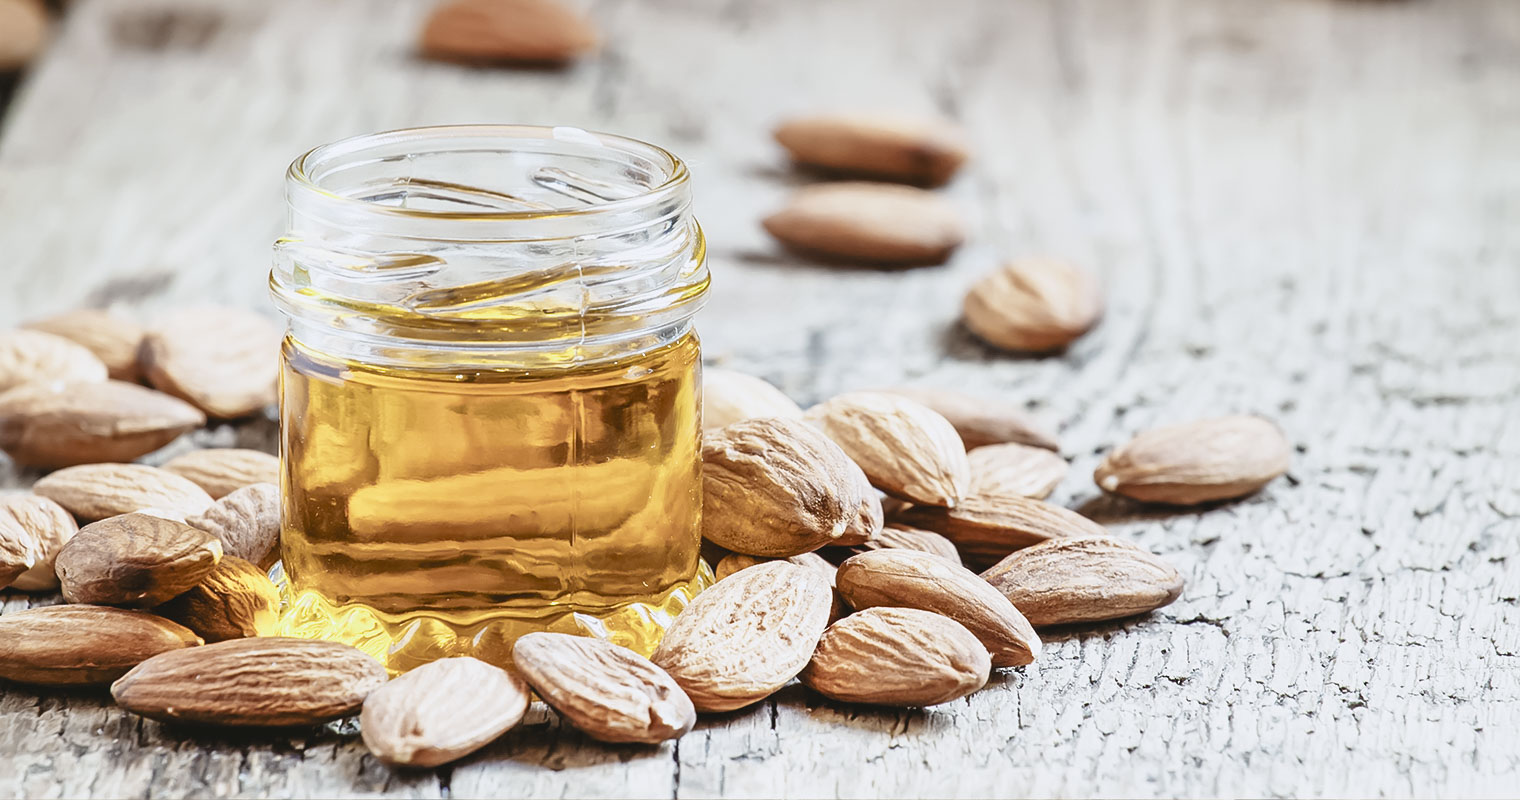 Sweet Almond Oil, first extraction, in a small glass jar, dry almond nuts on an old wooden background, selective focus